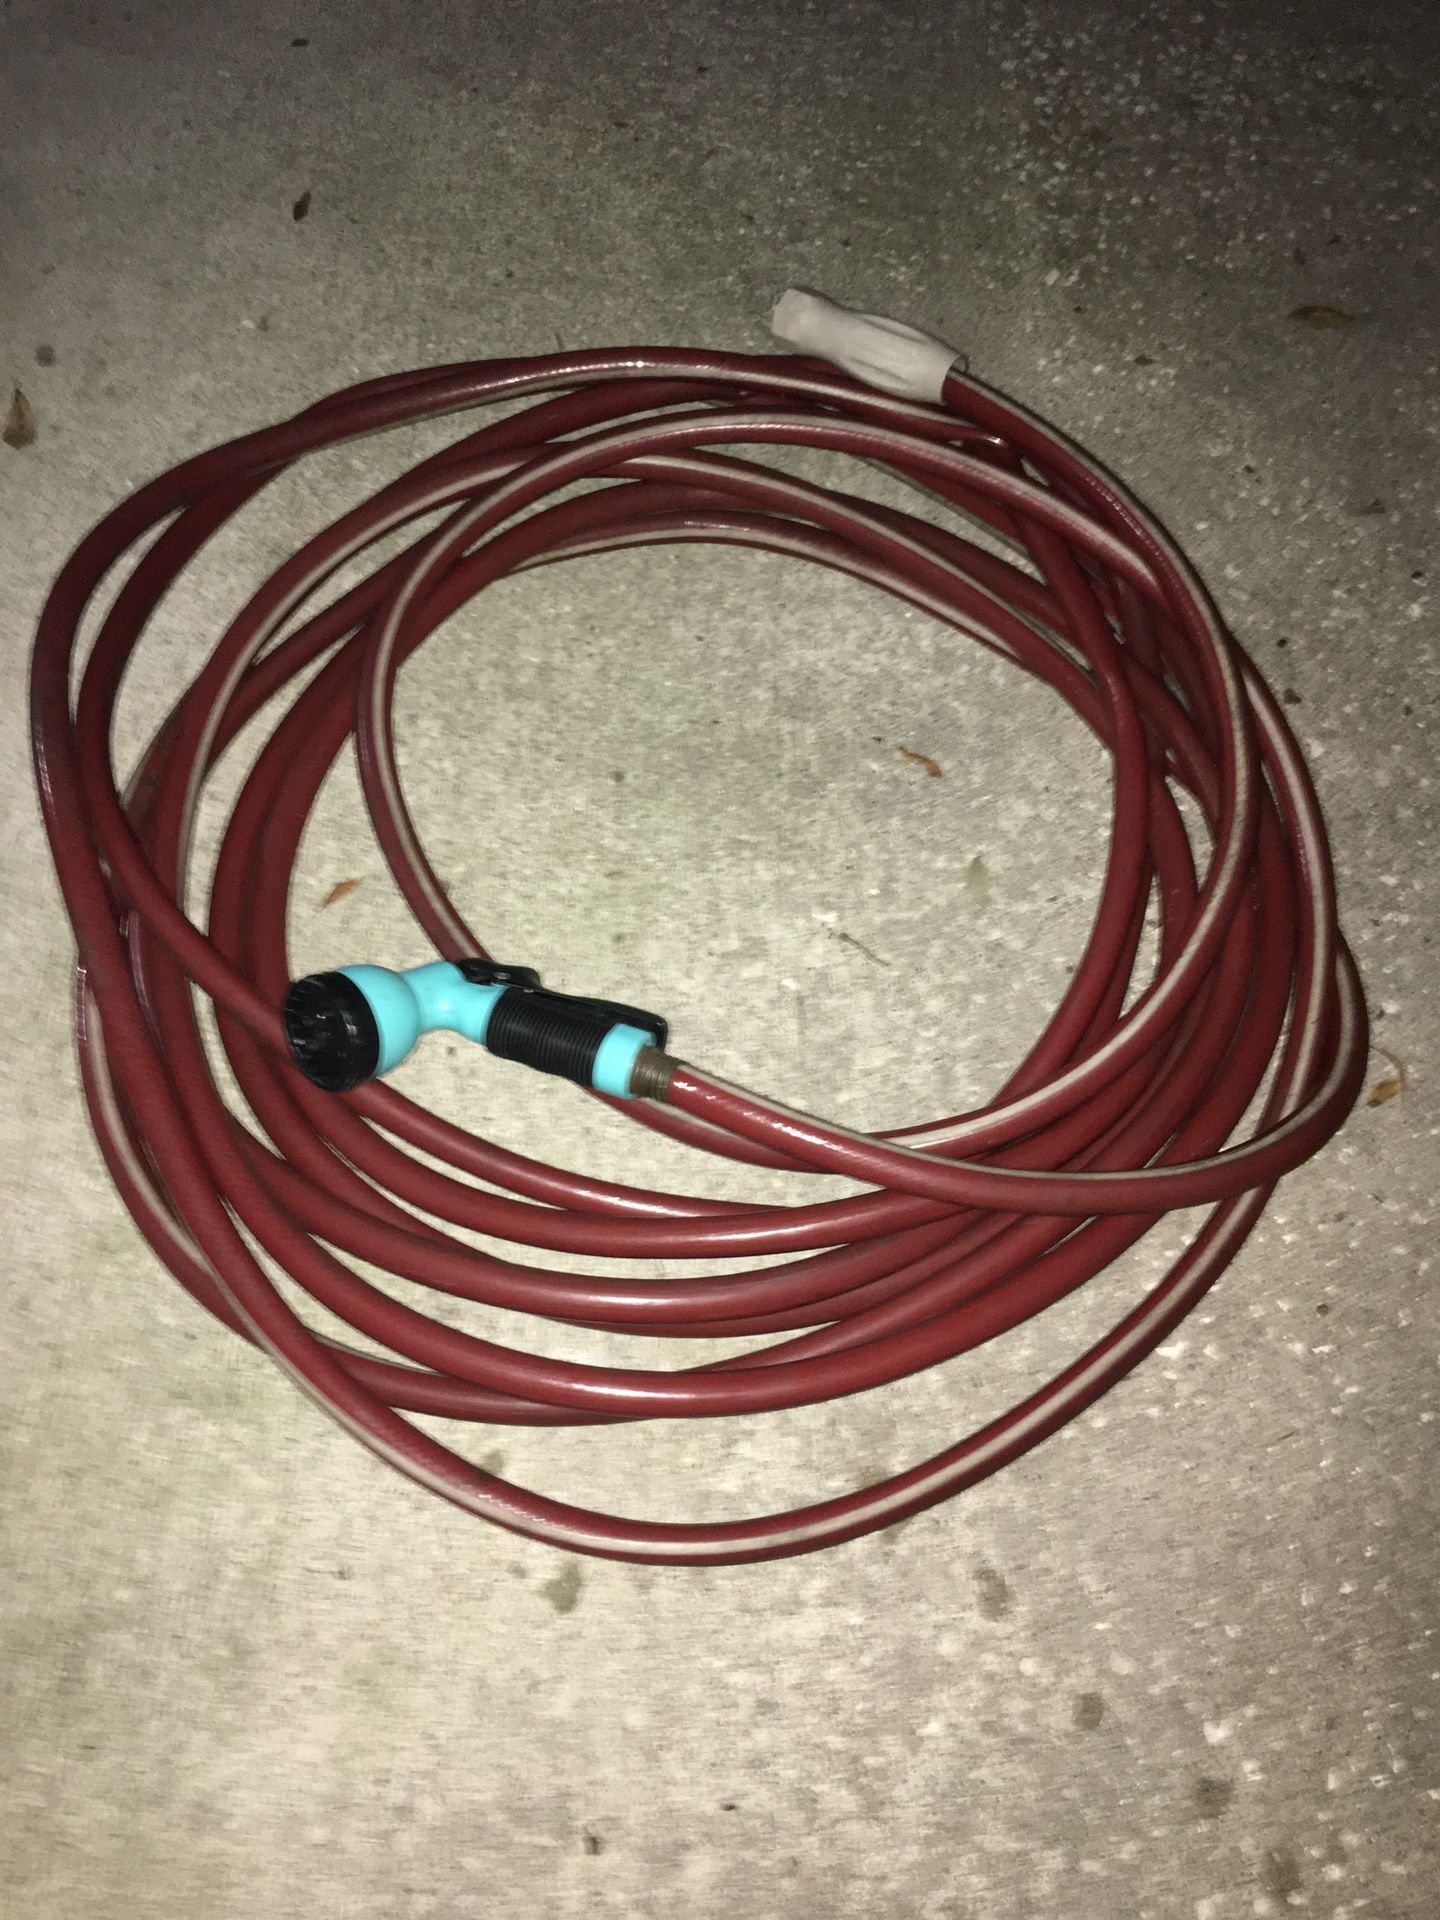 Commercial Water Hose